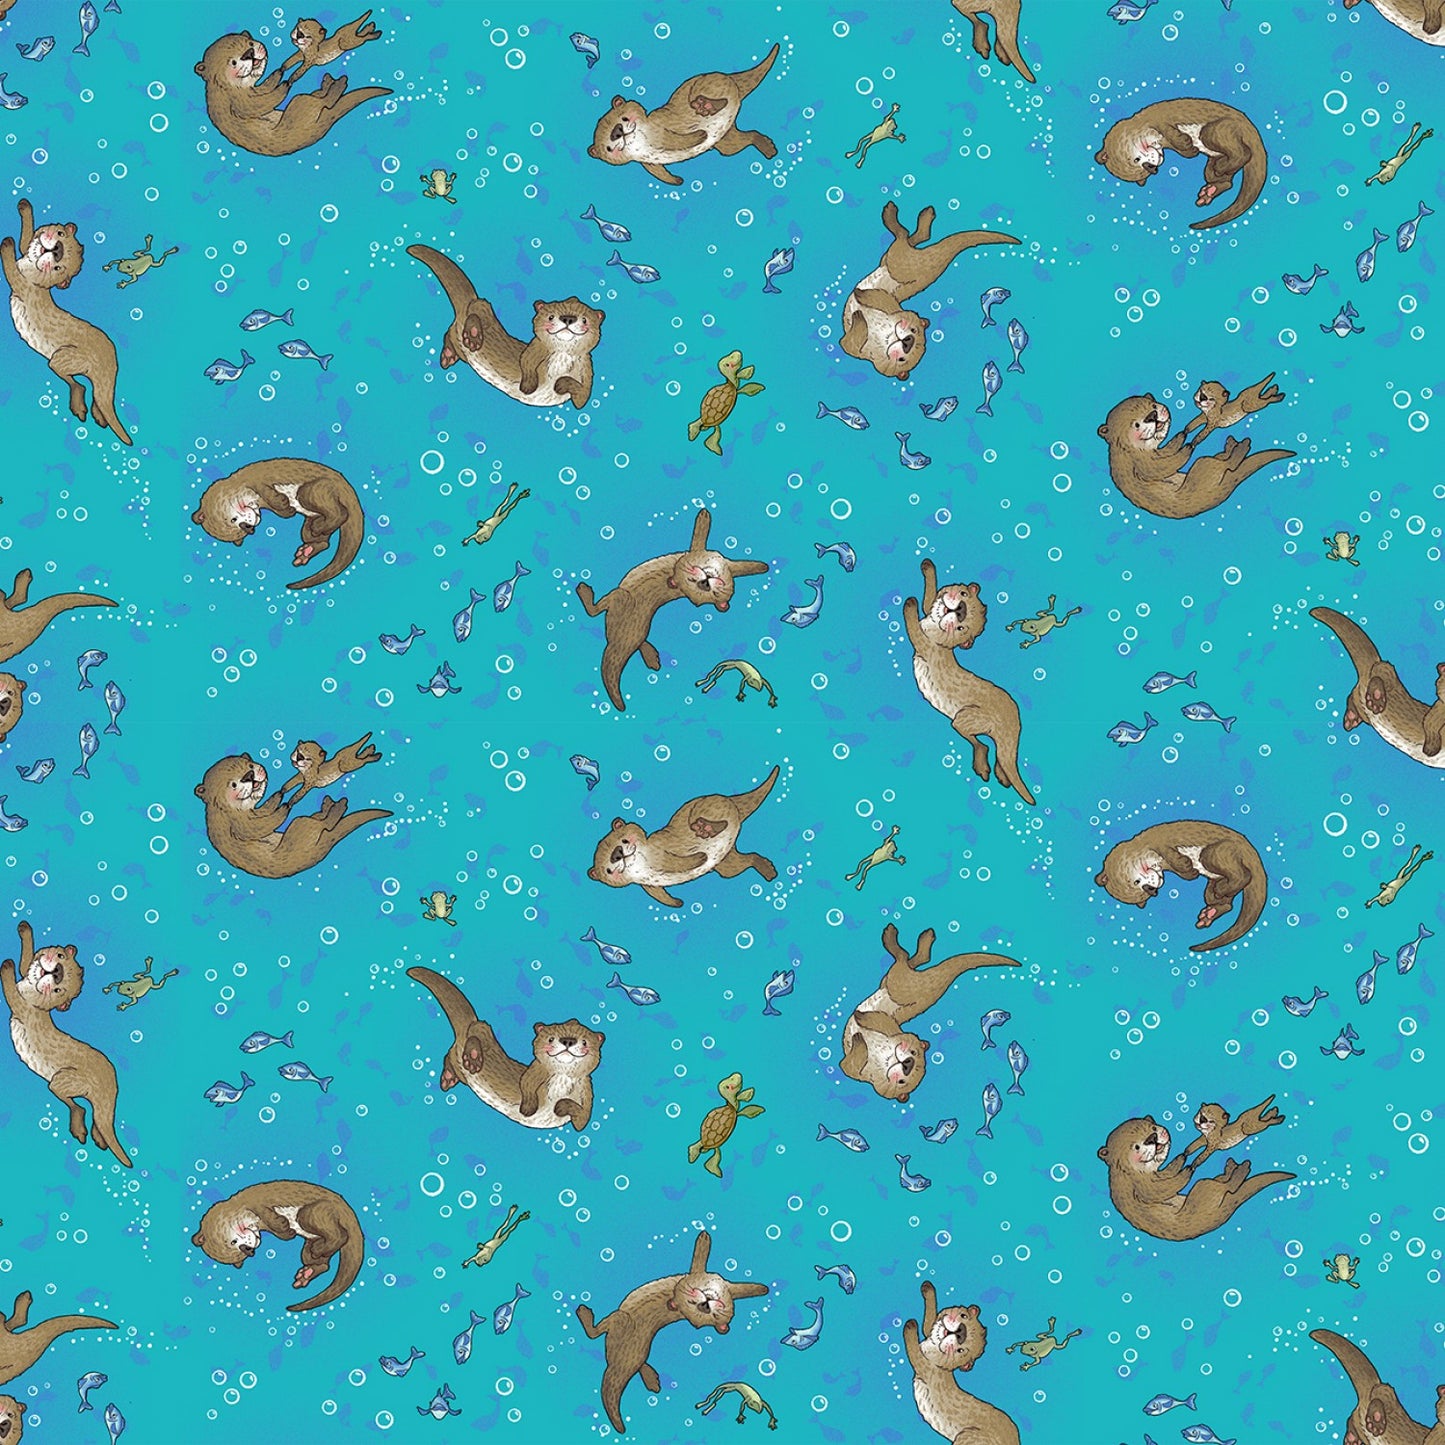 Henry Glass Otter Fabric - River Romp by Sharon Kuplack - Teal Underwater Otters - #867-77 - Cotton Fabric